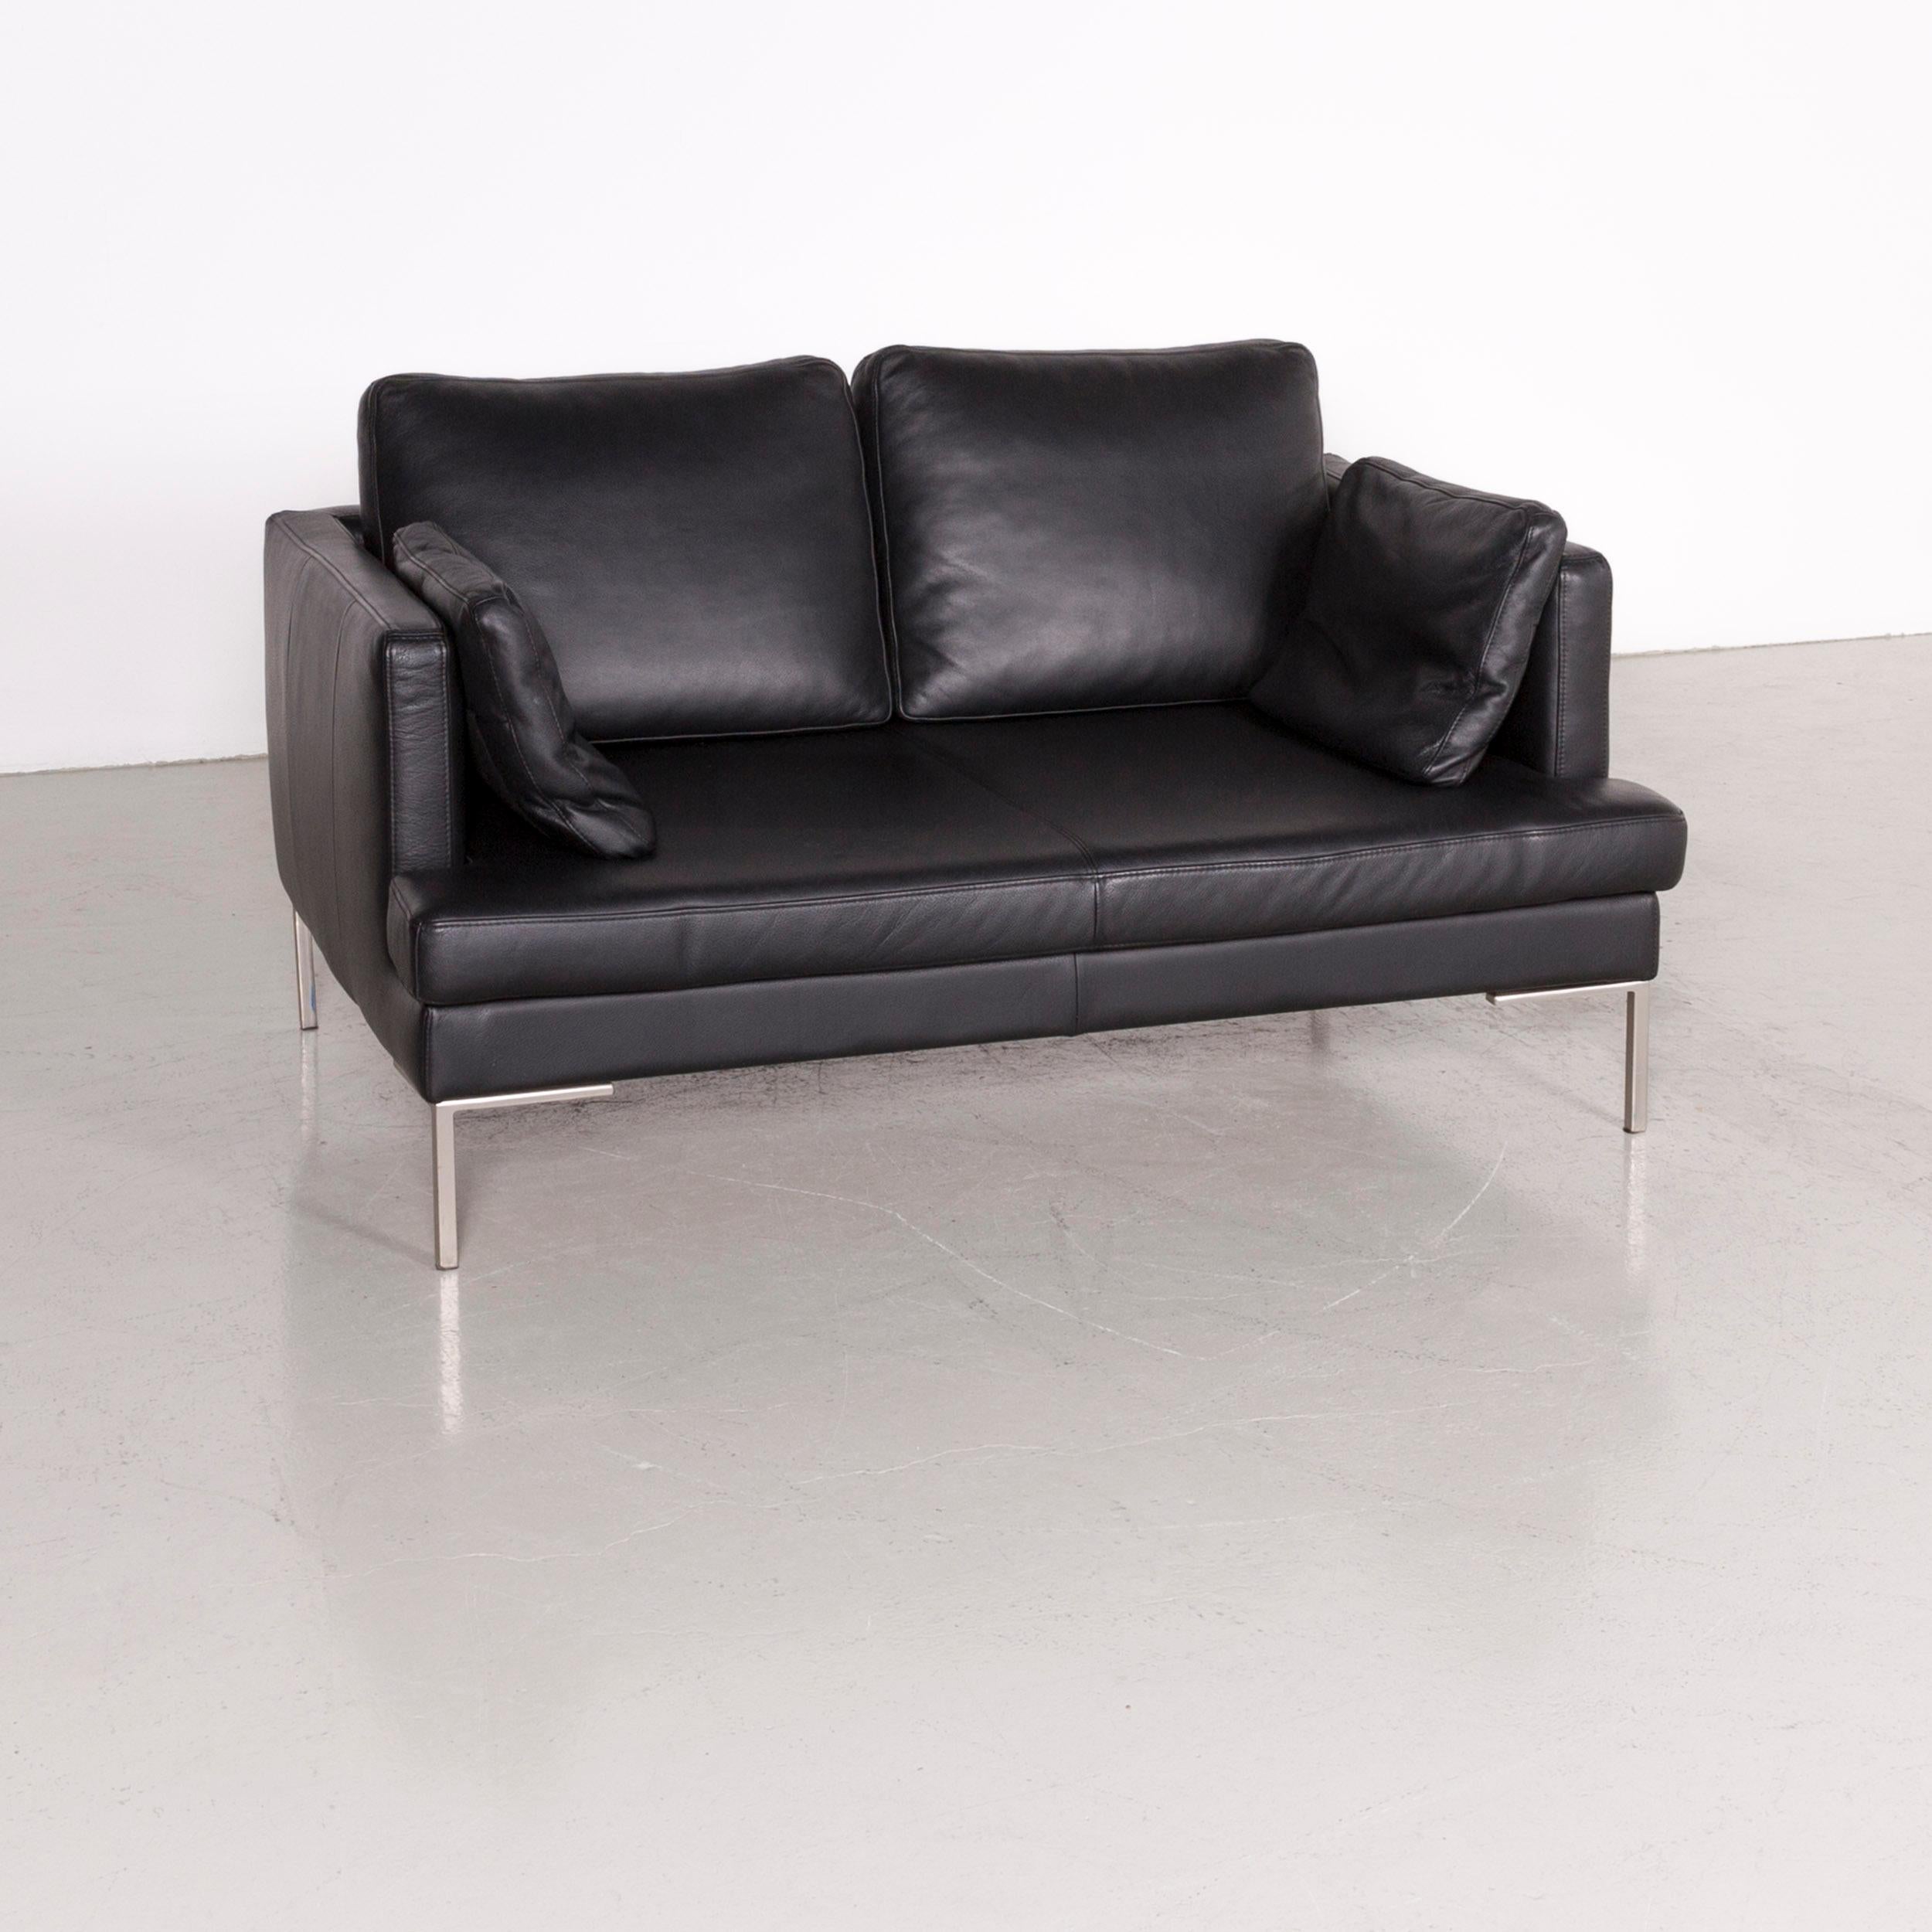 German Boconcept Designer Leather Sofa Black Two-Seat Couch For Sale